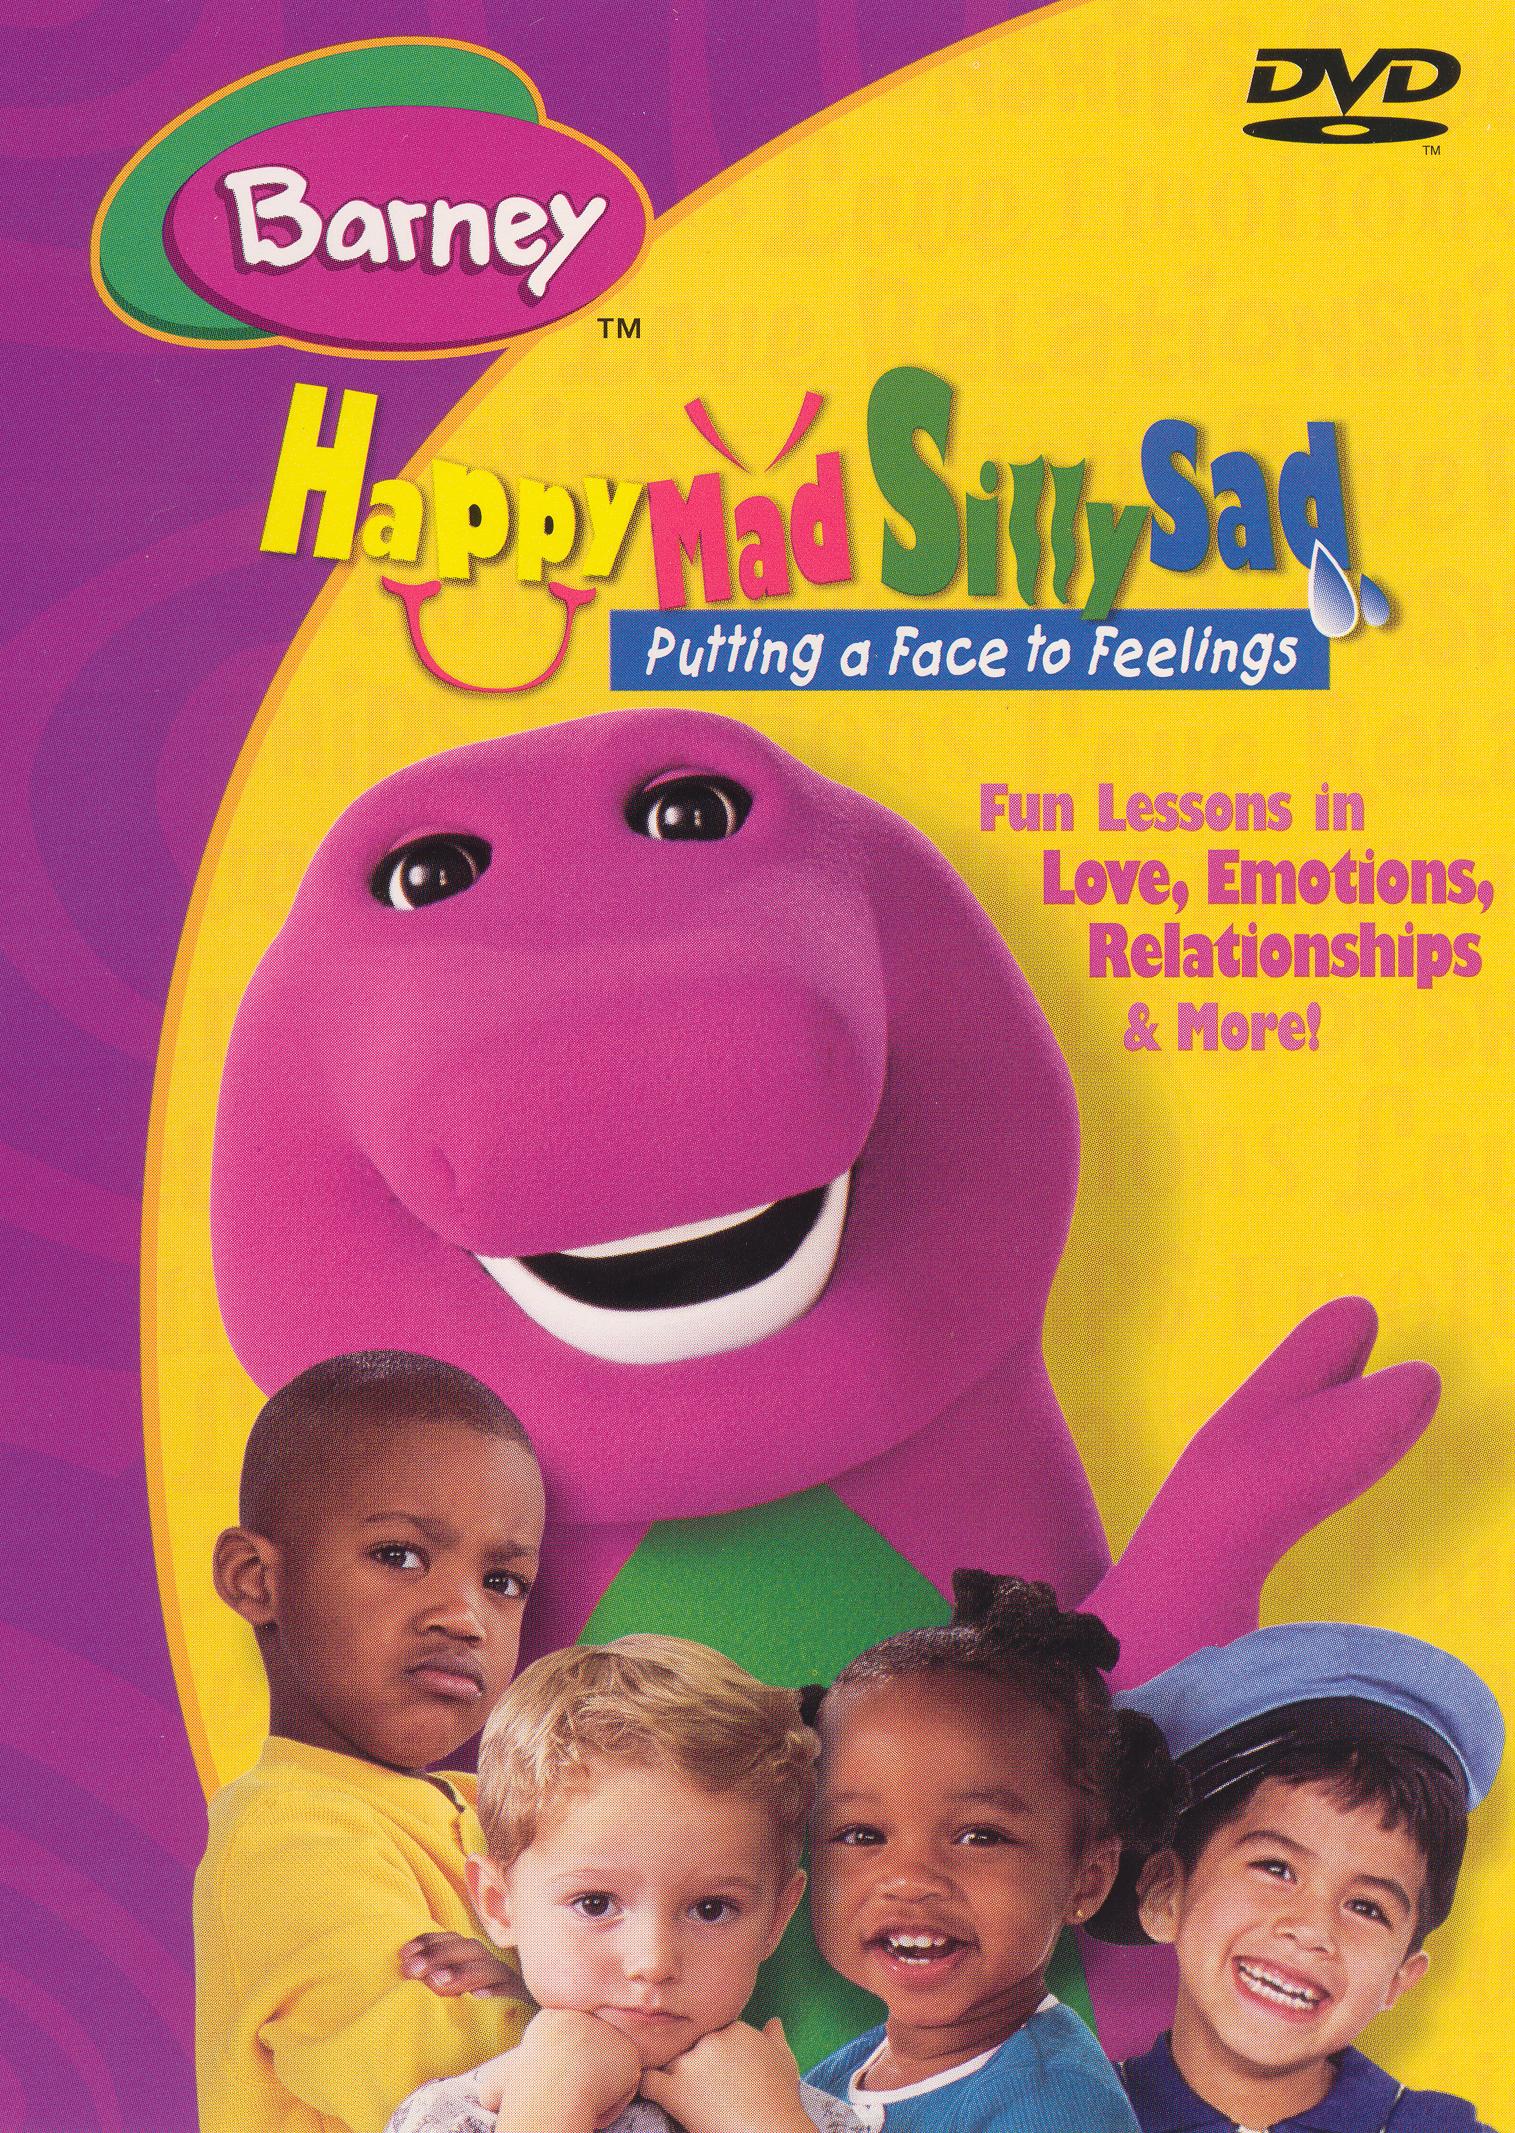 Barney Happy Mad Silly Sad Putting A Face To Feelings Dvd Best Buy